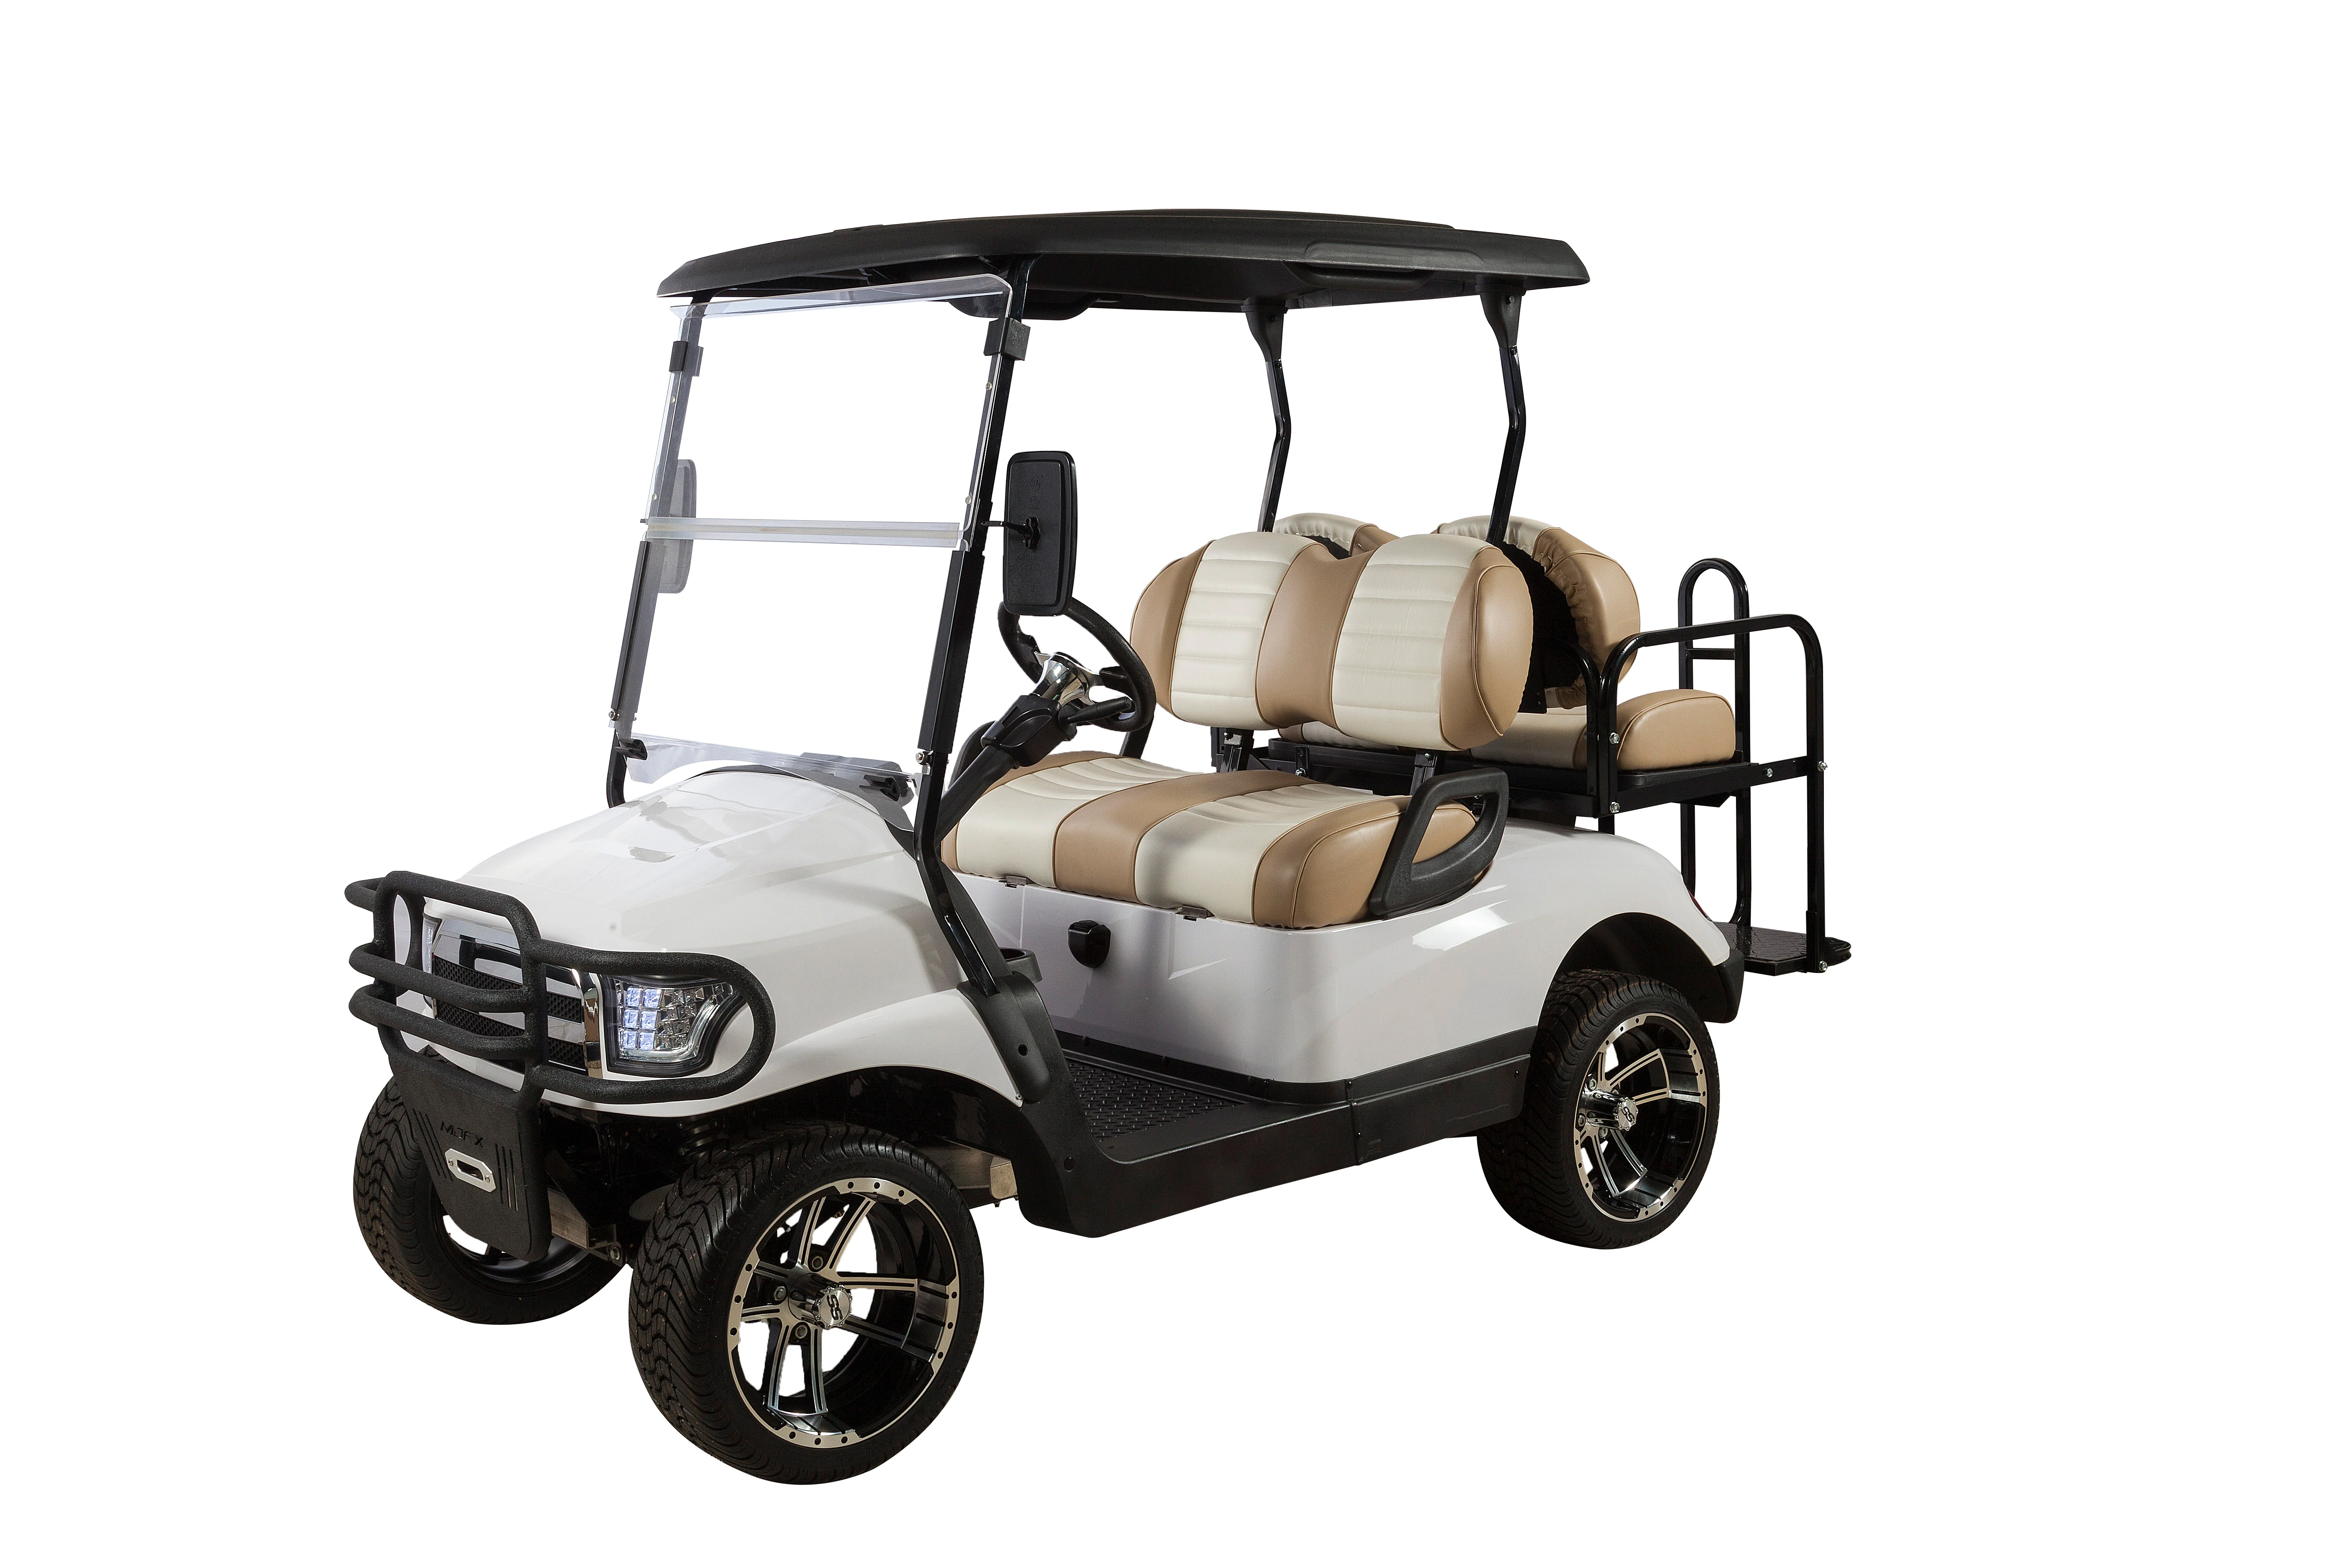 4 Seats Electric Golf Cart Used In Off Road For Best Price And Superior